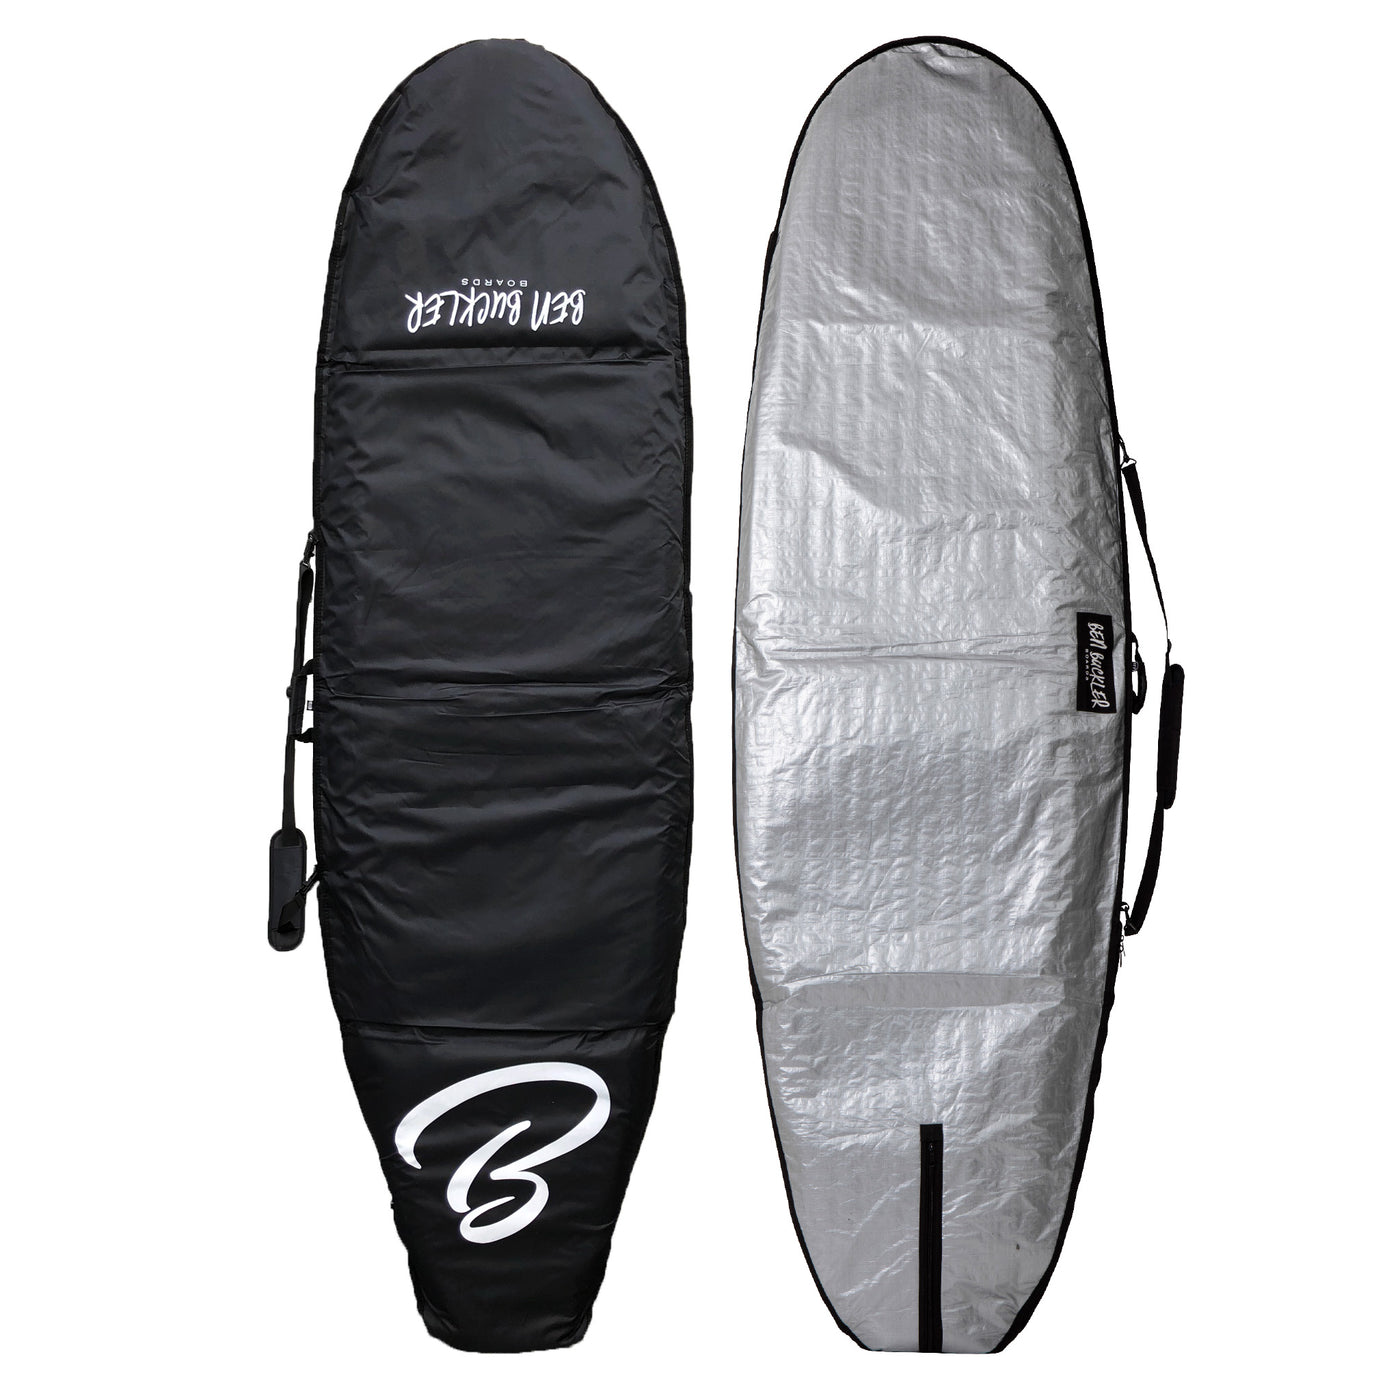 front and back of bag for stand up paddle boards by Ben Buckler Boards